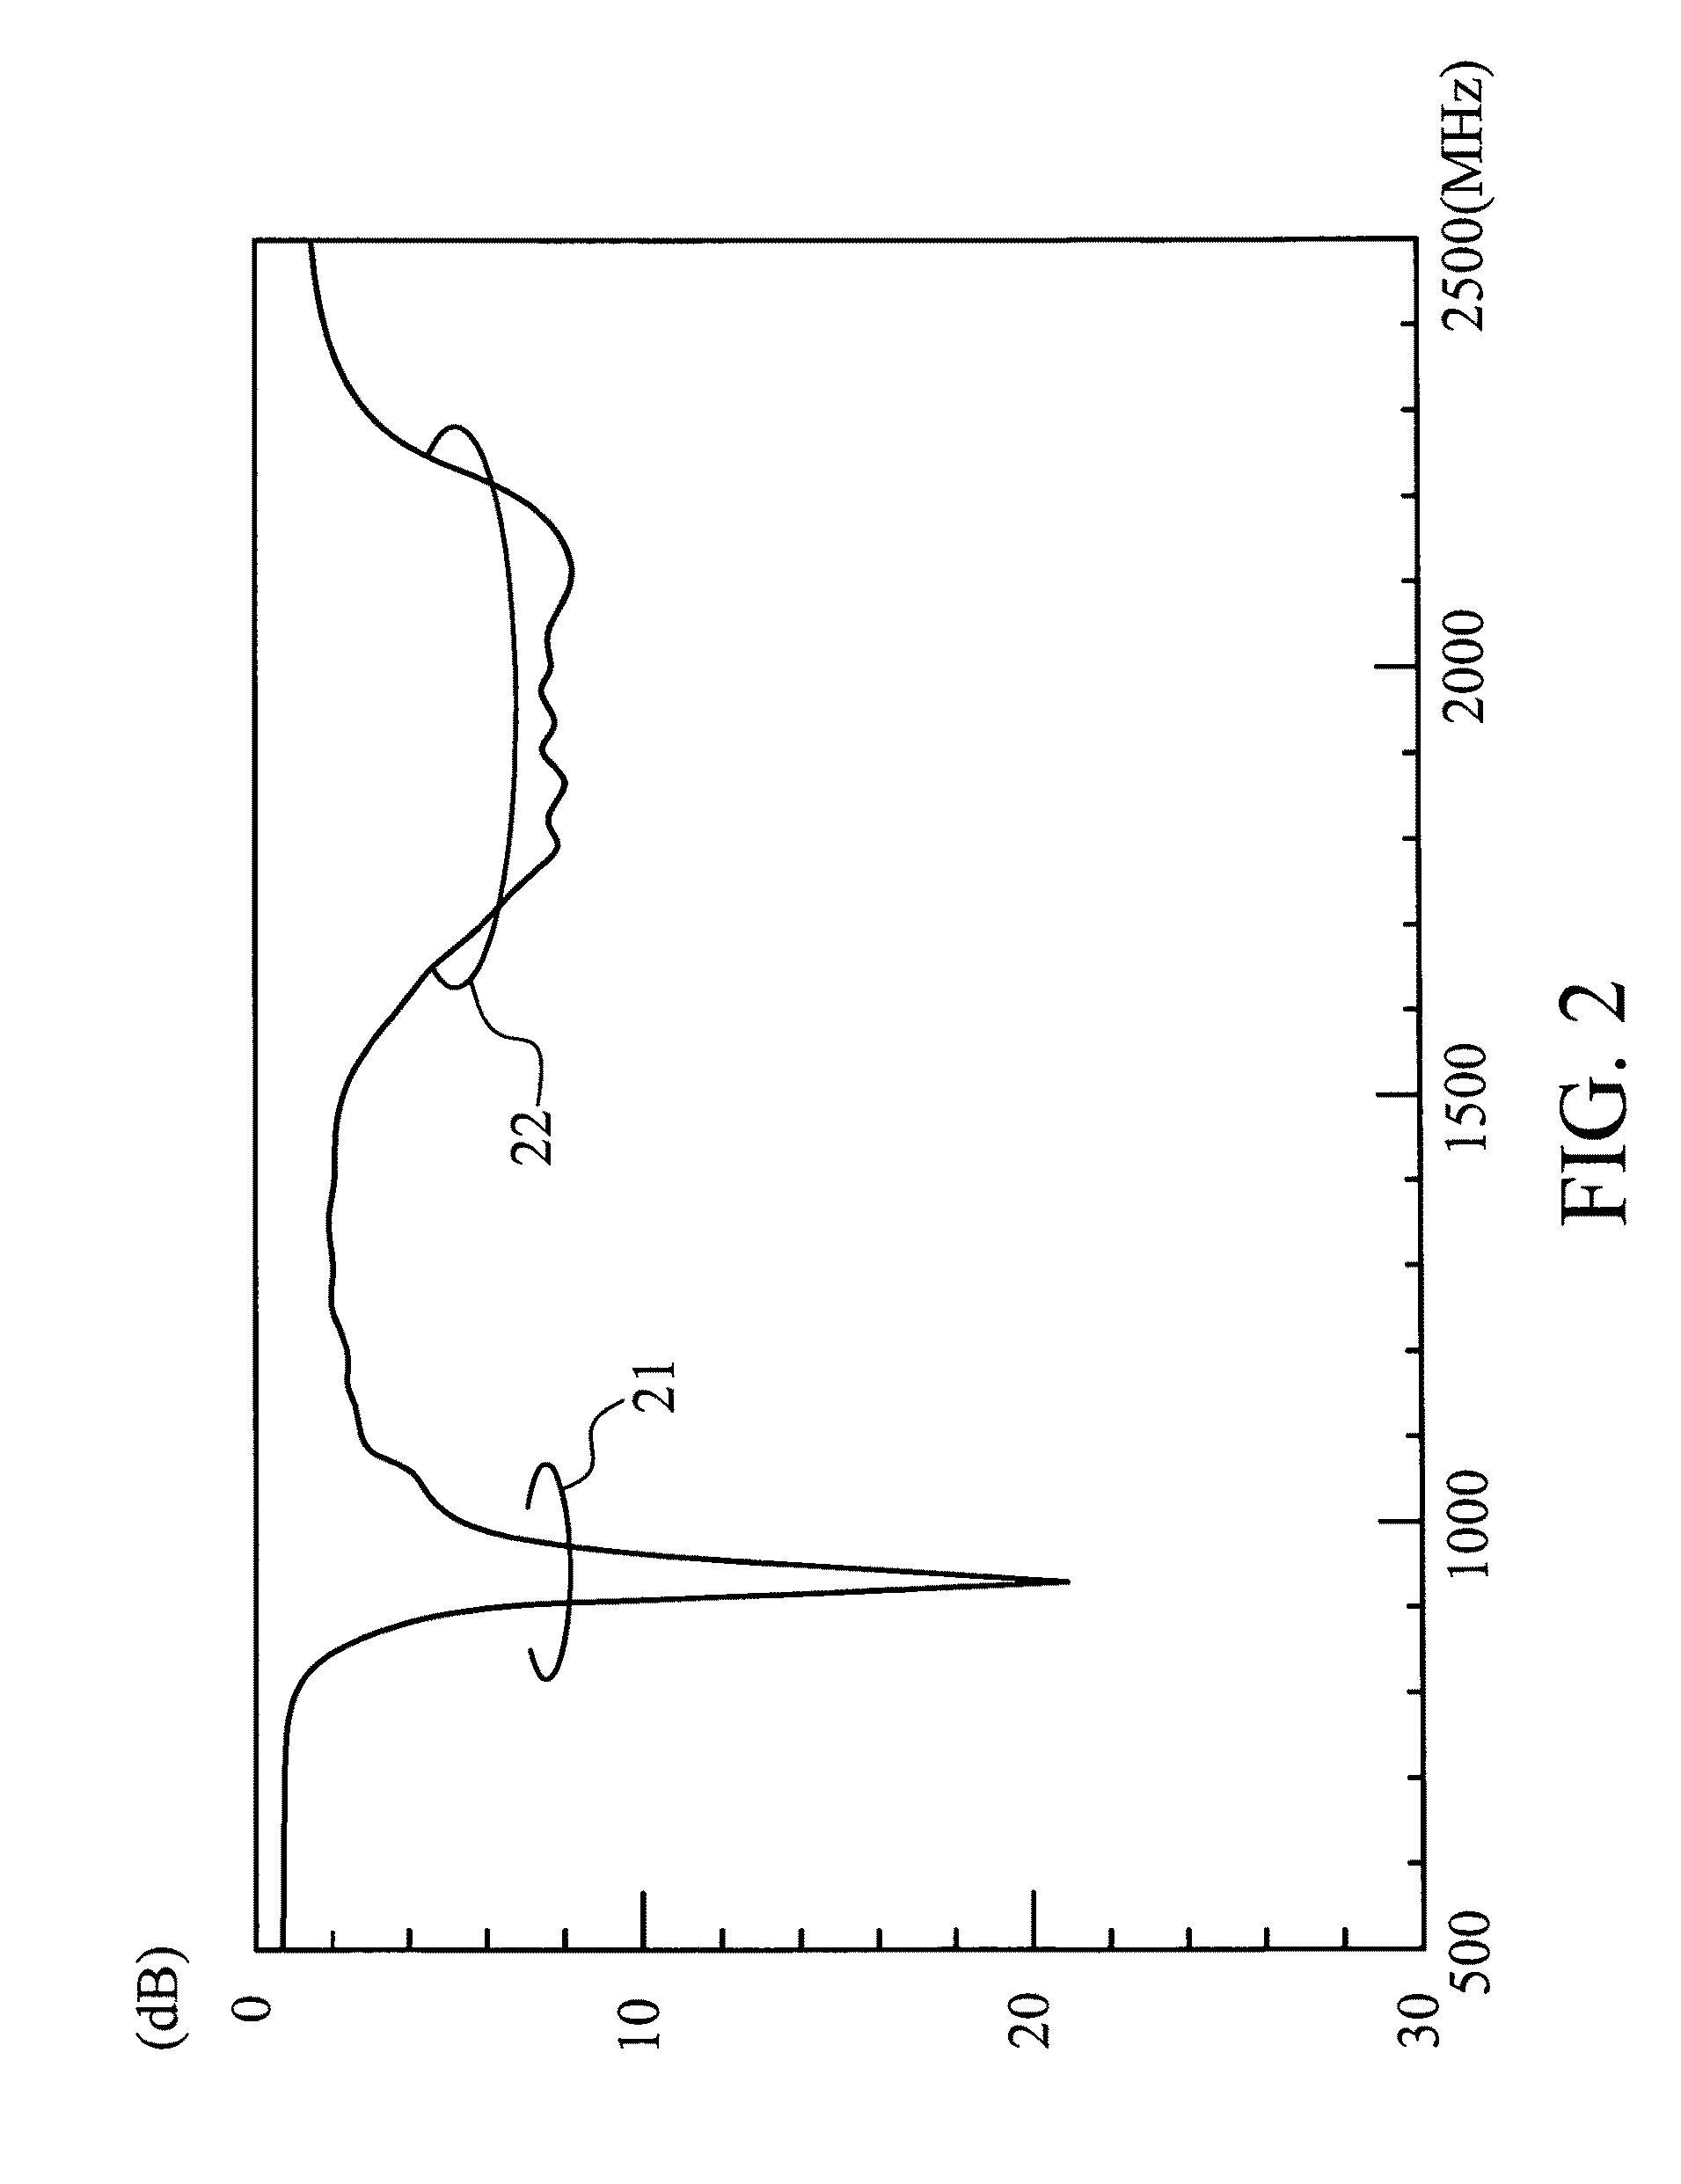 Coupled-fed multi-band loop antenna